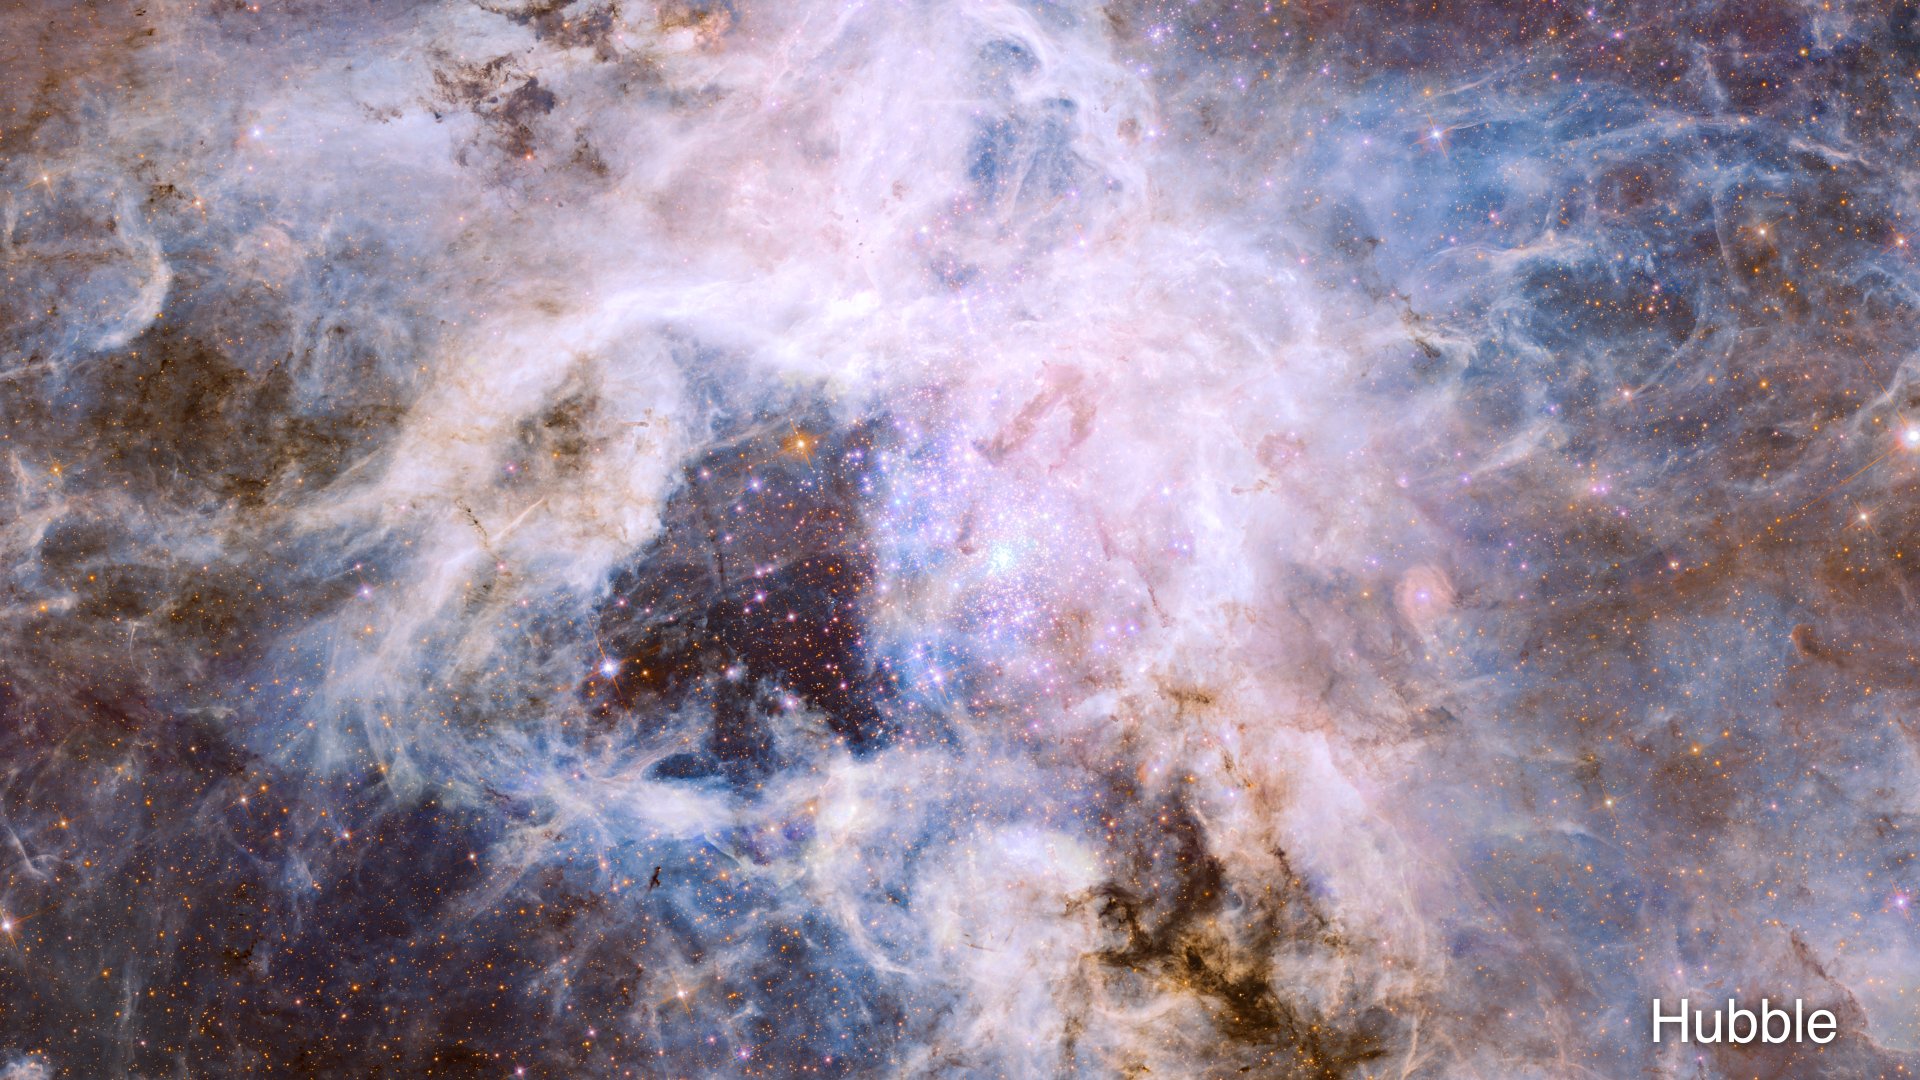 Pale, nebulous clouds throng around a darker central area with a cluster of sparkling stars. These clouds are interspersed with darker filaments of deep brown and light blue. Orange stars peer through the clouds throughout the image.